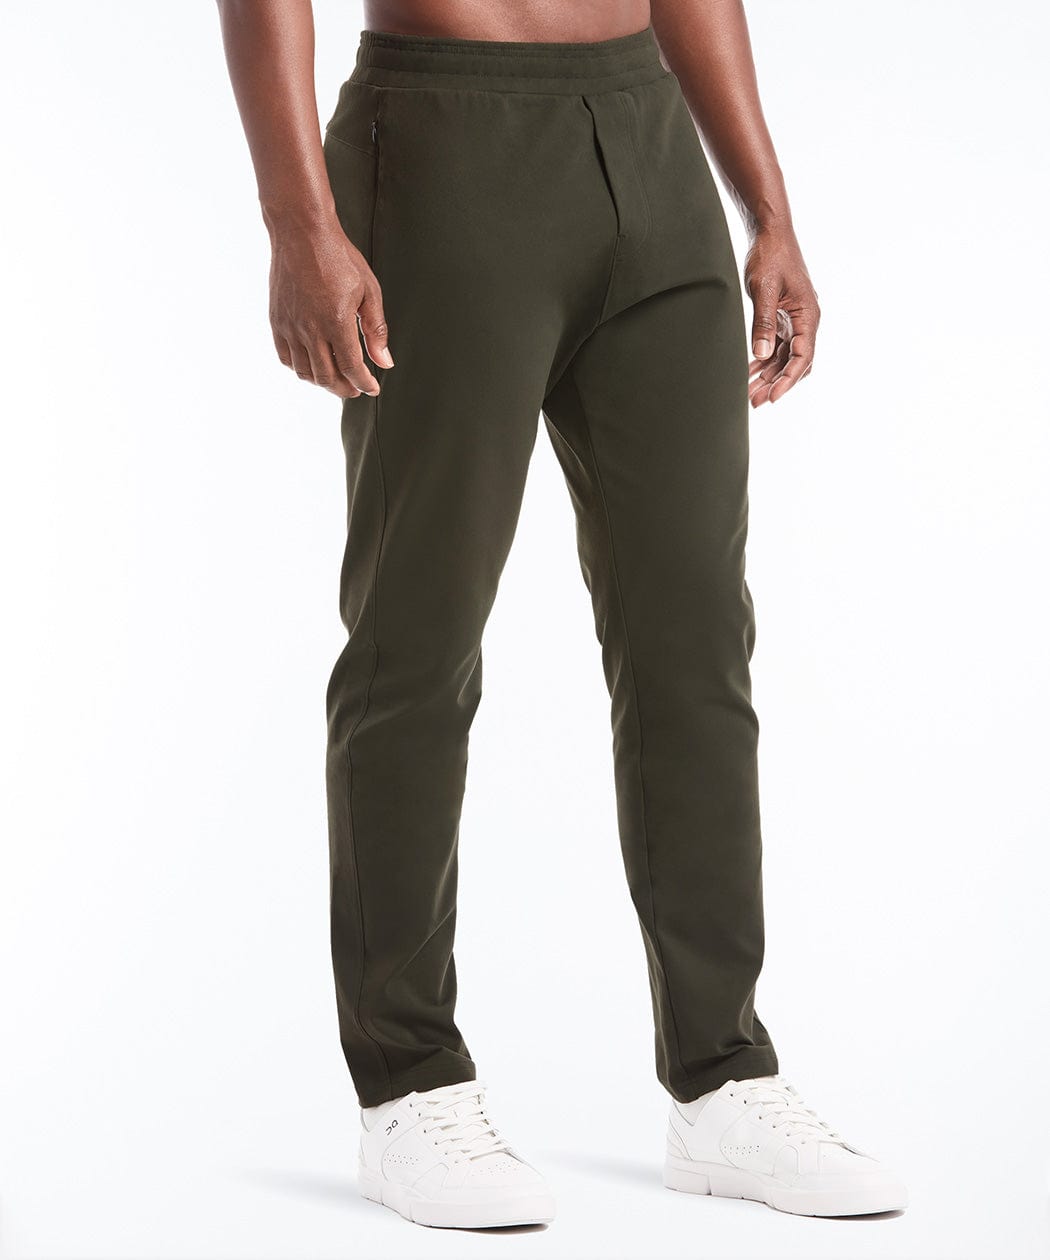 Cameland Men's Cargo Trousers Solid Color Zipper Work Wear Cargo Pockets  Full Pants Casual Stylish Wearing 